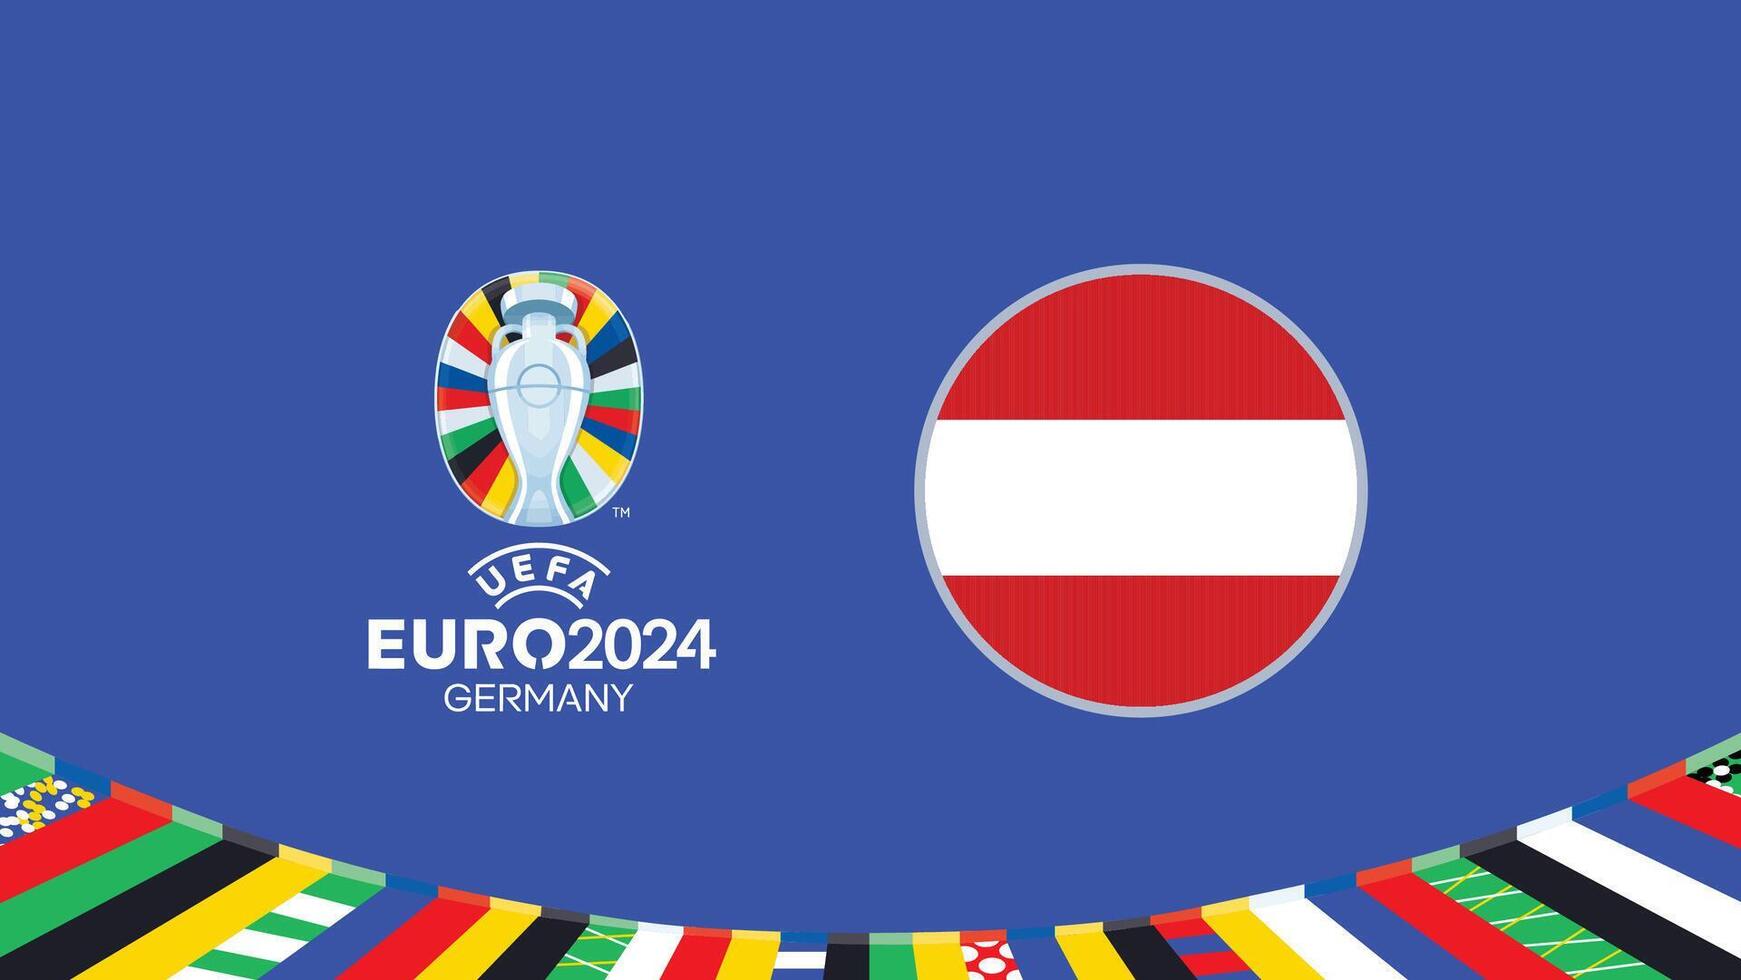 Euro 2024 Germany Austria Flag Teams Design With Official Symbol Logo Abstract Countries European Football Illustration vector